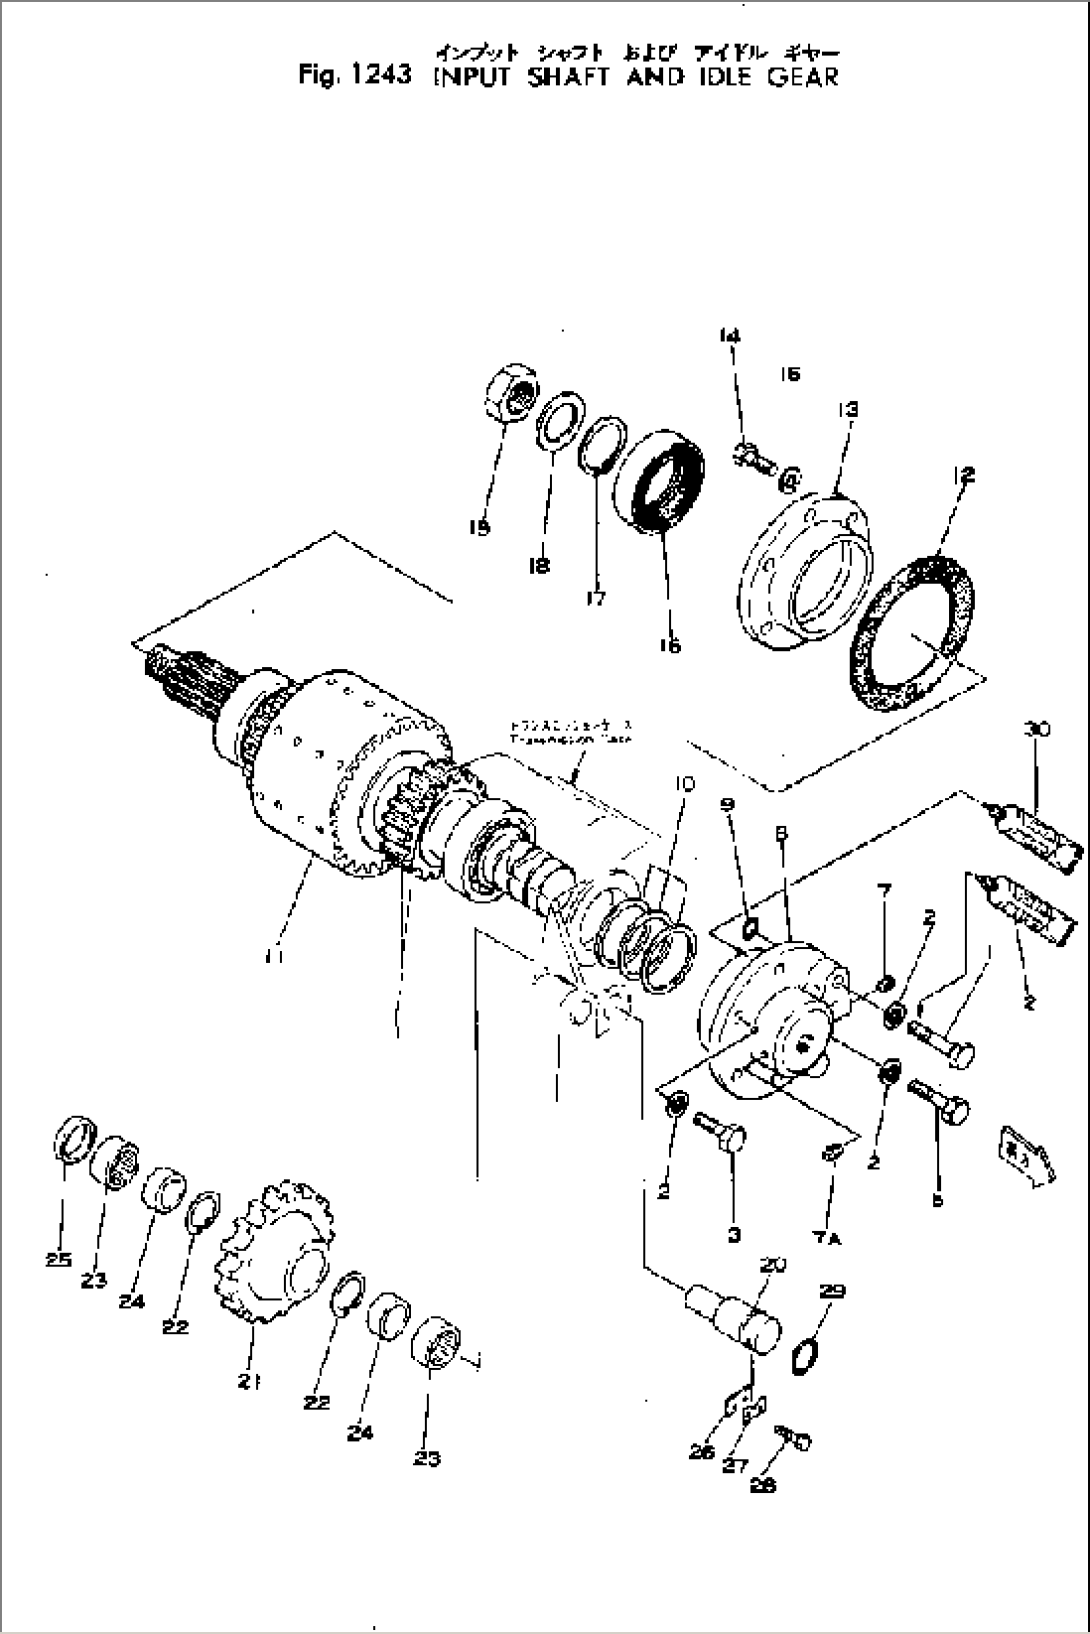 INPUT SHAFT AND IDLE GEAR(#3-)